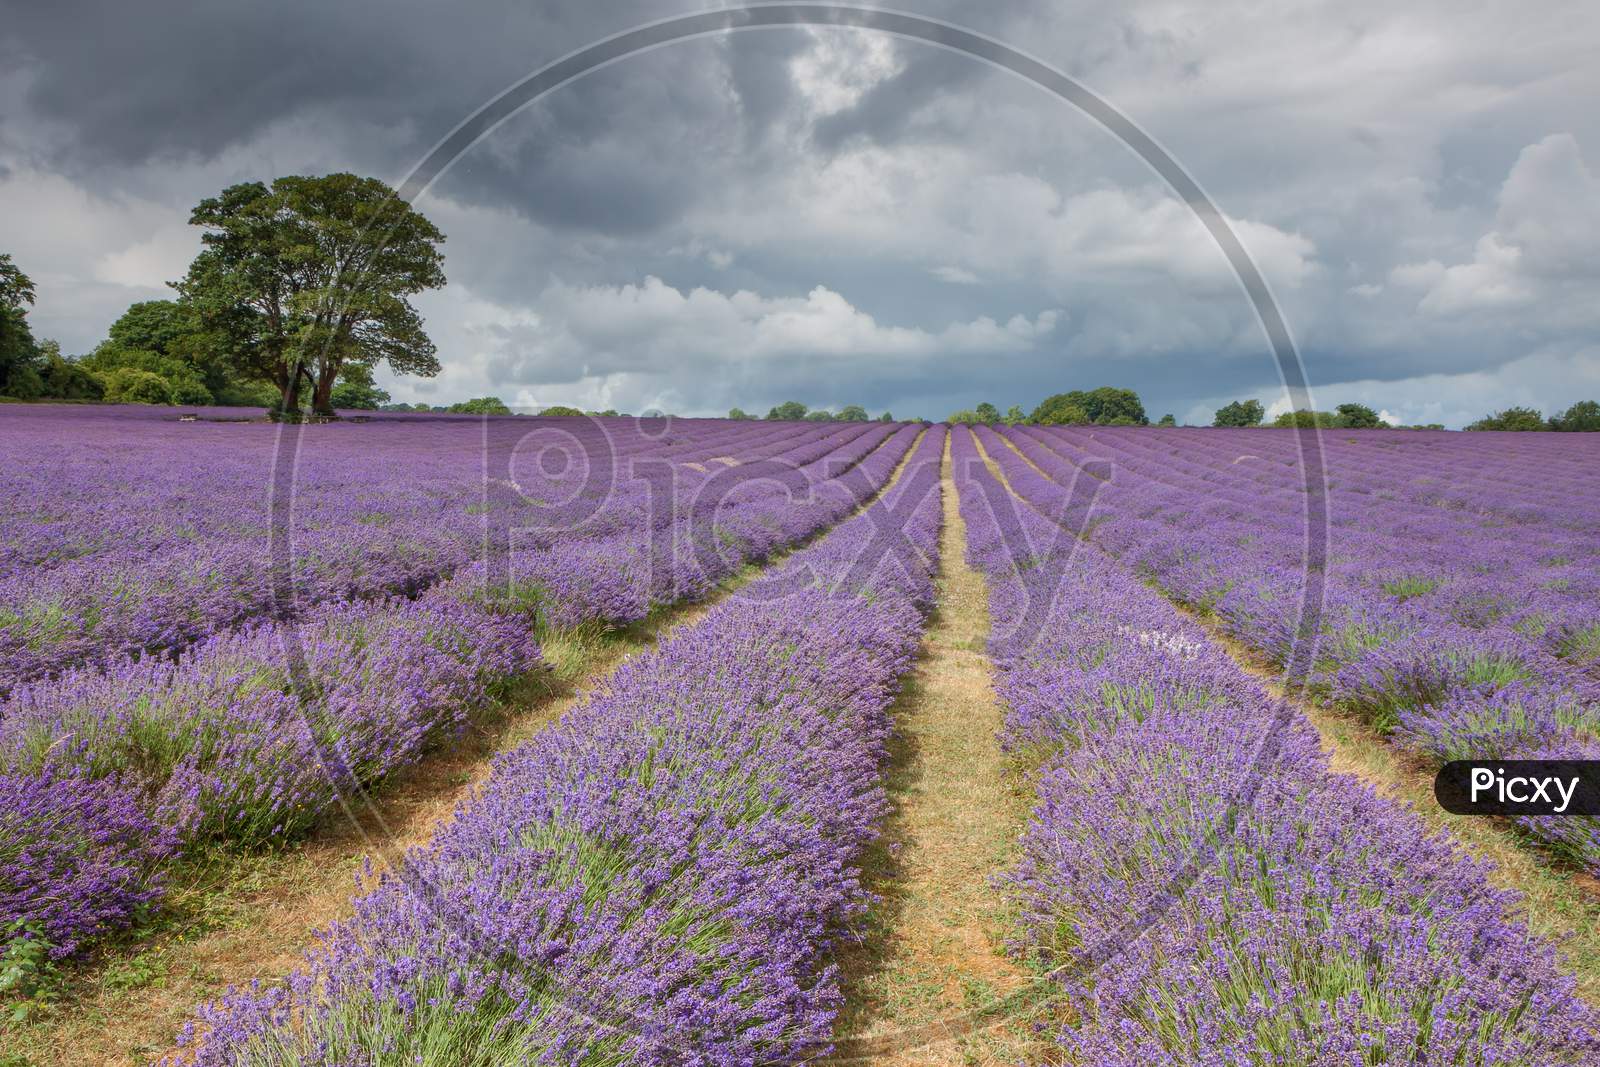 Stormy Sky Over A Lavender Field In Banstead Surrey